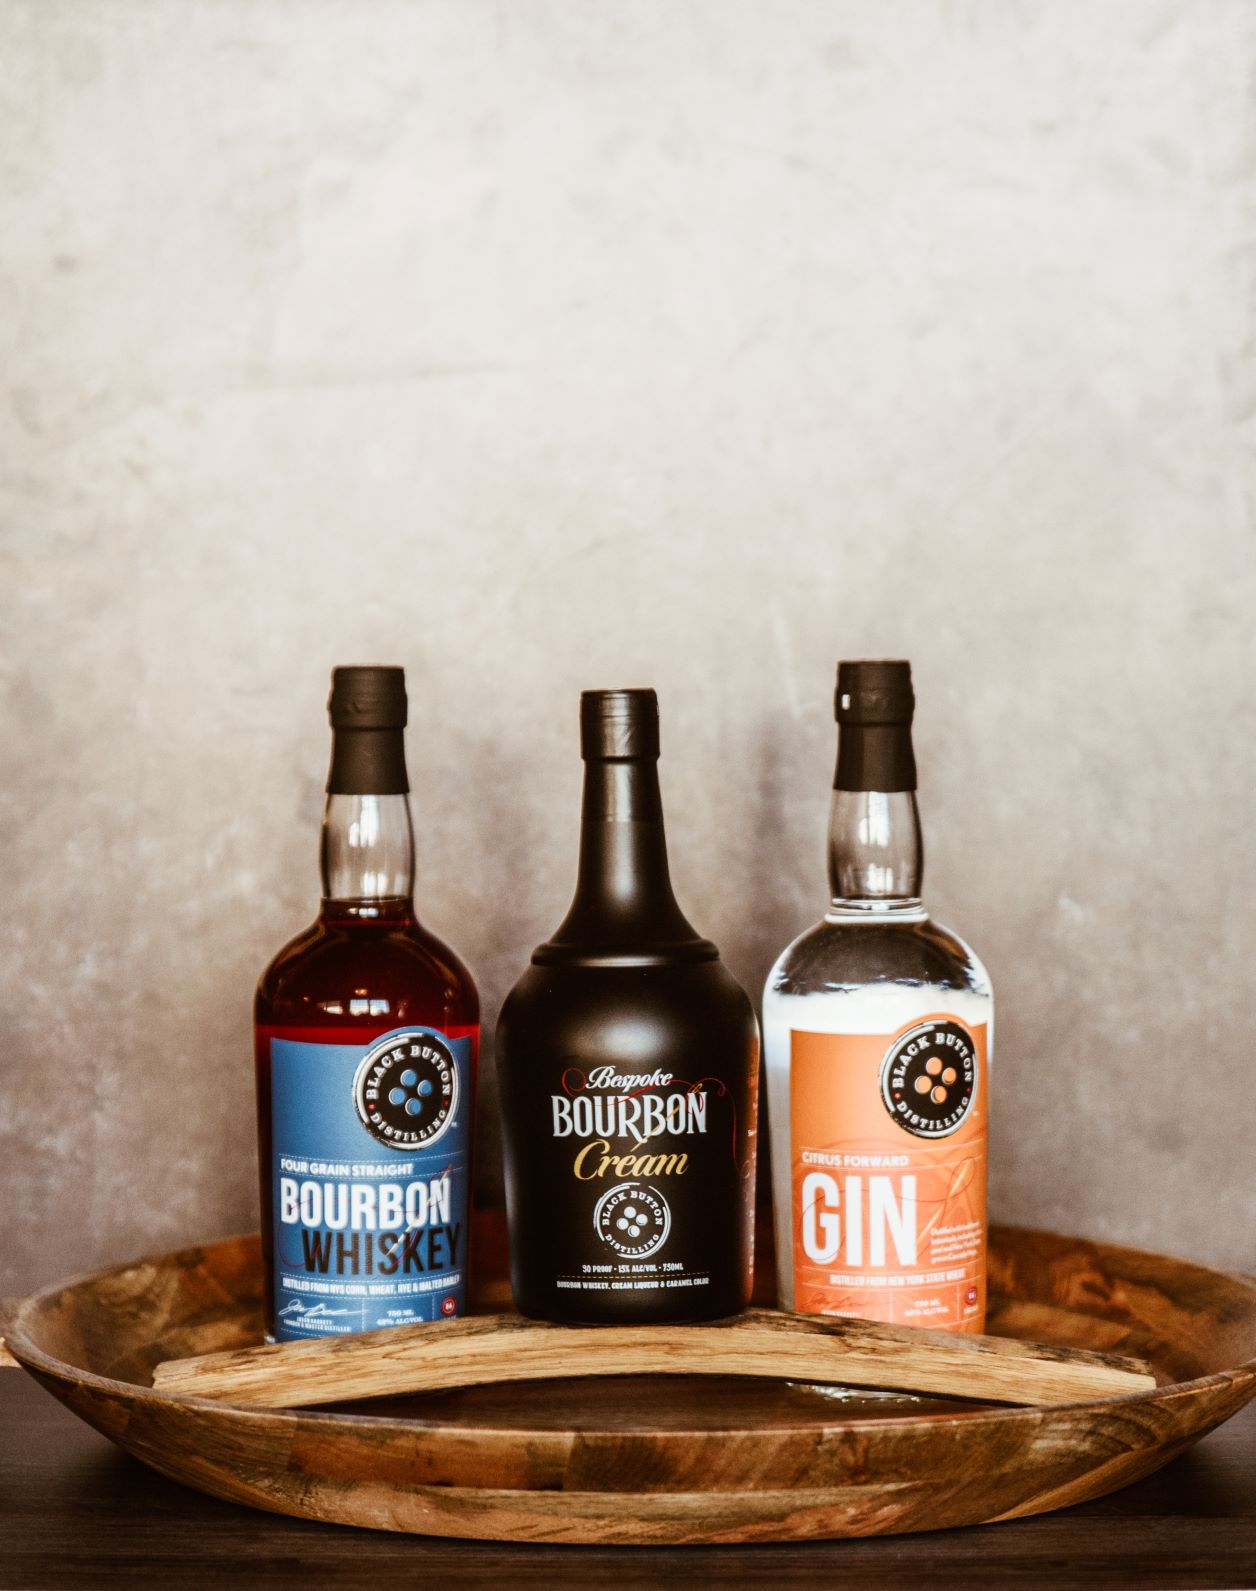 Black Button Distilling Spirits Now Available in Massachusetts